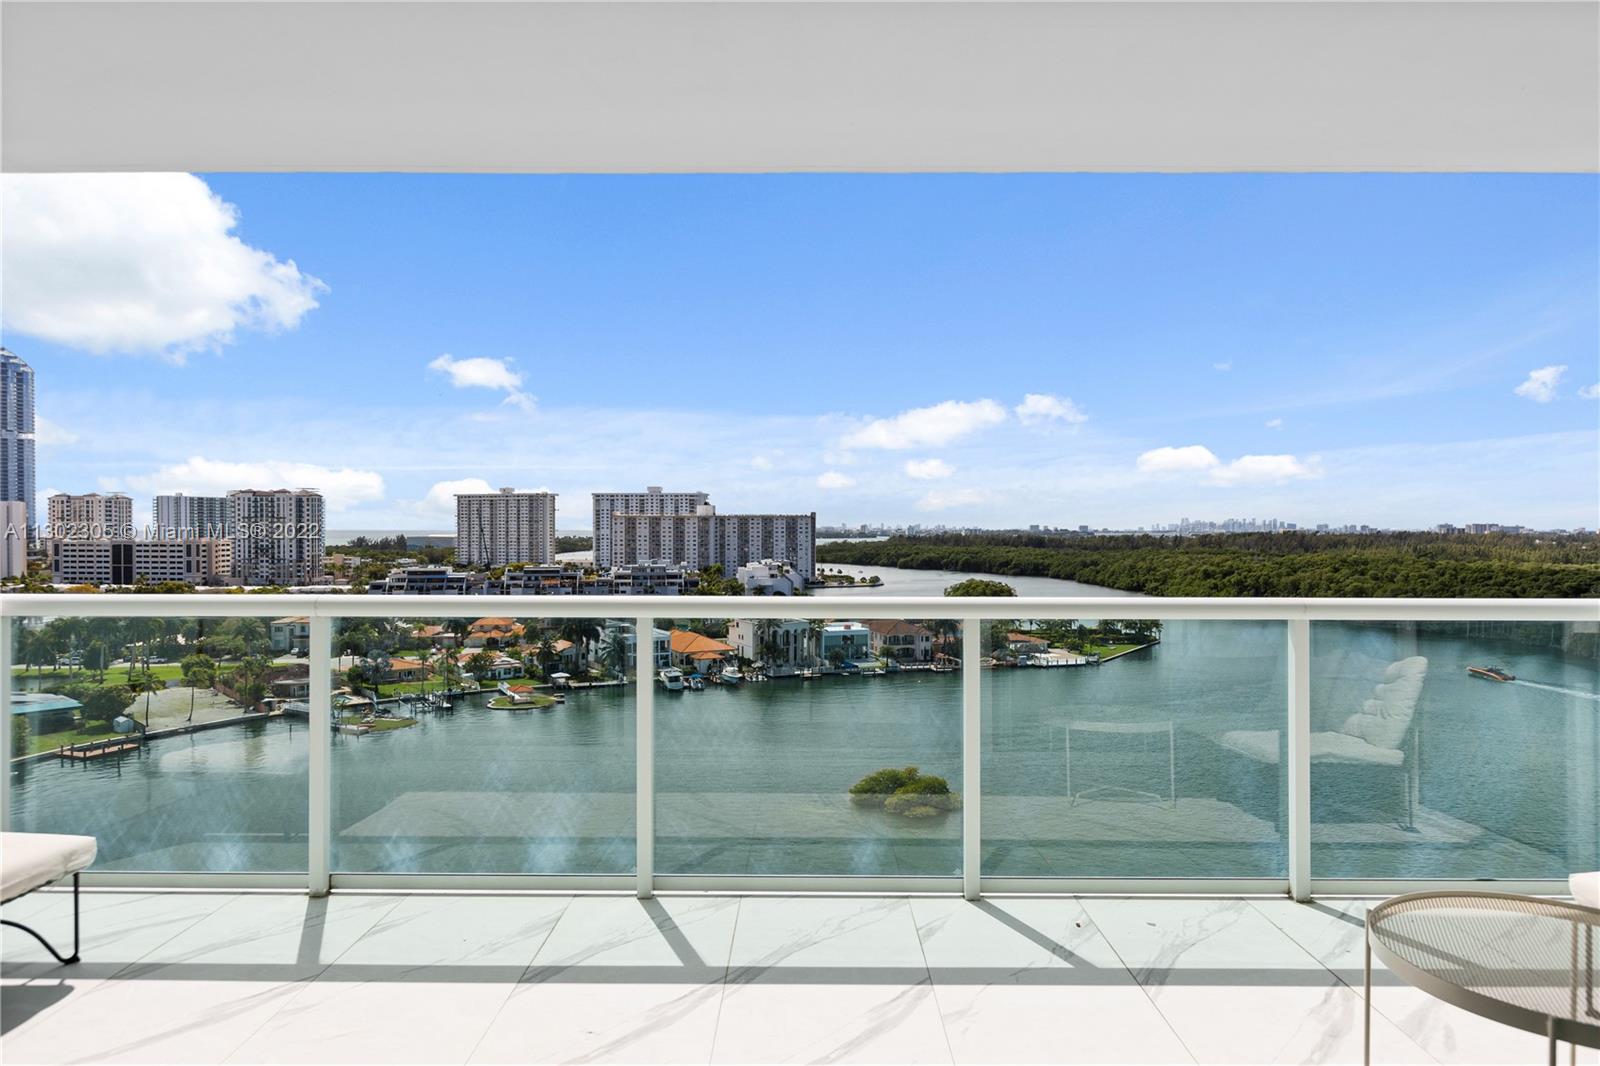 Enjoy amazing sunsets and endless views of the bay, Intracoastal, Oleta River State Park, and Haulover. Bright 3/3 open floor plan residence is fully furnished and ready to move in now. Unit features Italian cabinets, stainless steal appliances, white porcelain floors throughout, floor to ceiling windows. Building have private marina with both wet and dry docks . State of the art amenities include pool overlooking bay, spa with sauna and steam room, jacuzzi, lounge areas, cabanas, café bar for residents and more! Video tour is also available by request. 2 parking are included (1 assigned and 1 valet).